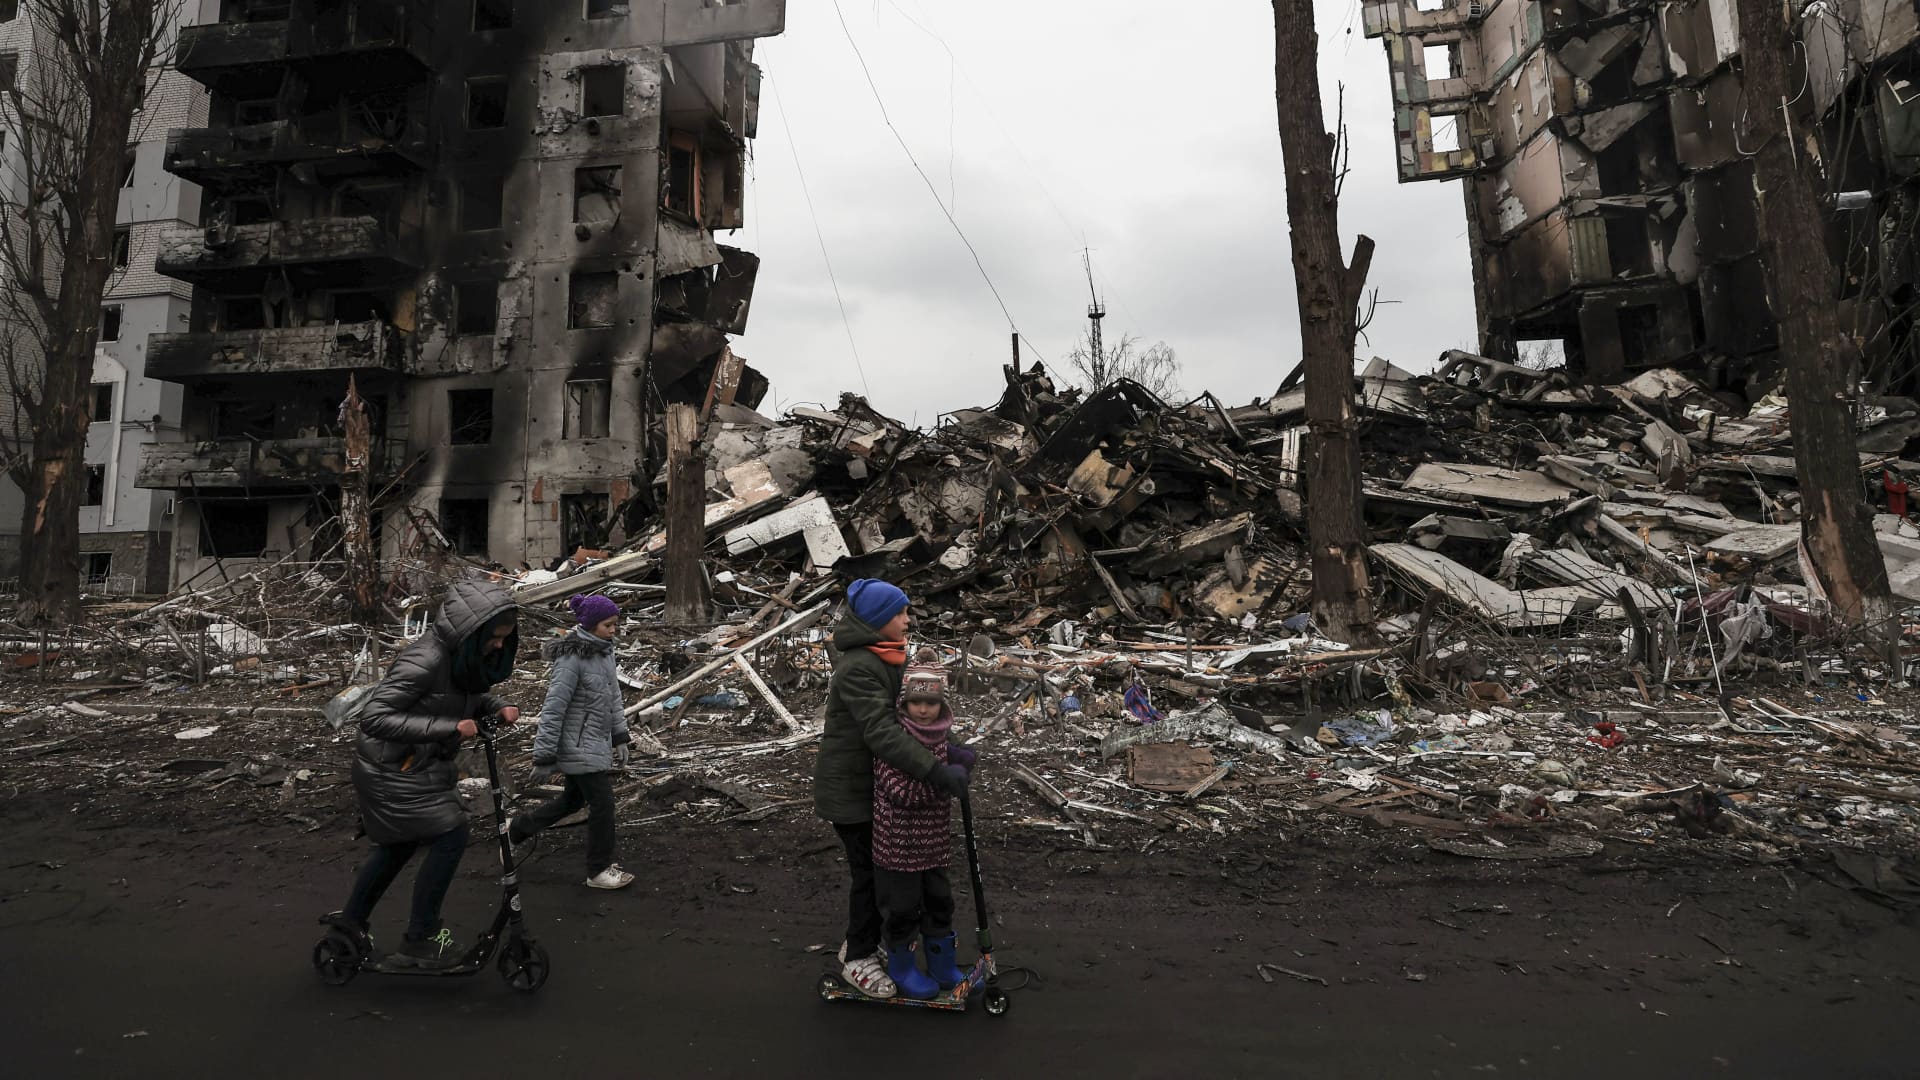 Ukrainian kids are seen playing among the ruins in the city of Borodyanka on April 5, 2022. Borodyanka was the scene of heavy clashes for weeks while the Russian military were located there until about four days ago.